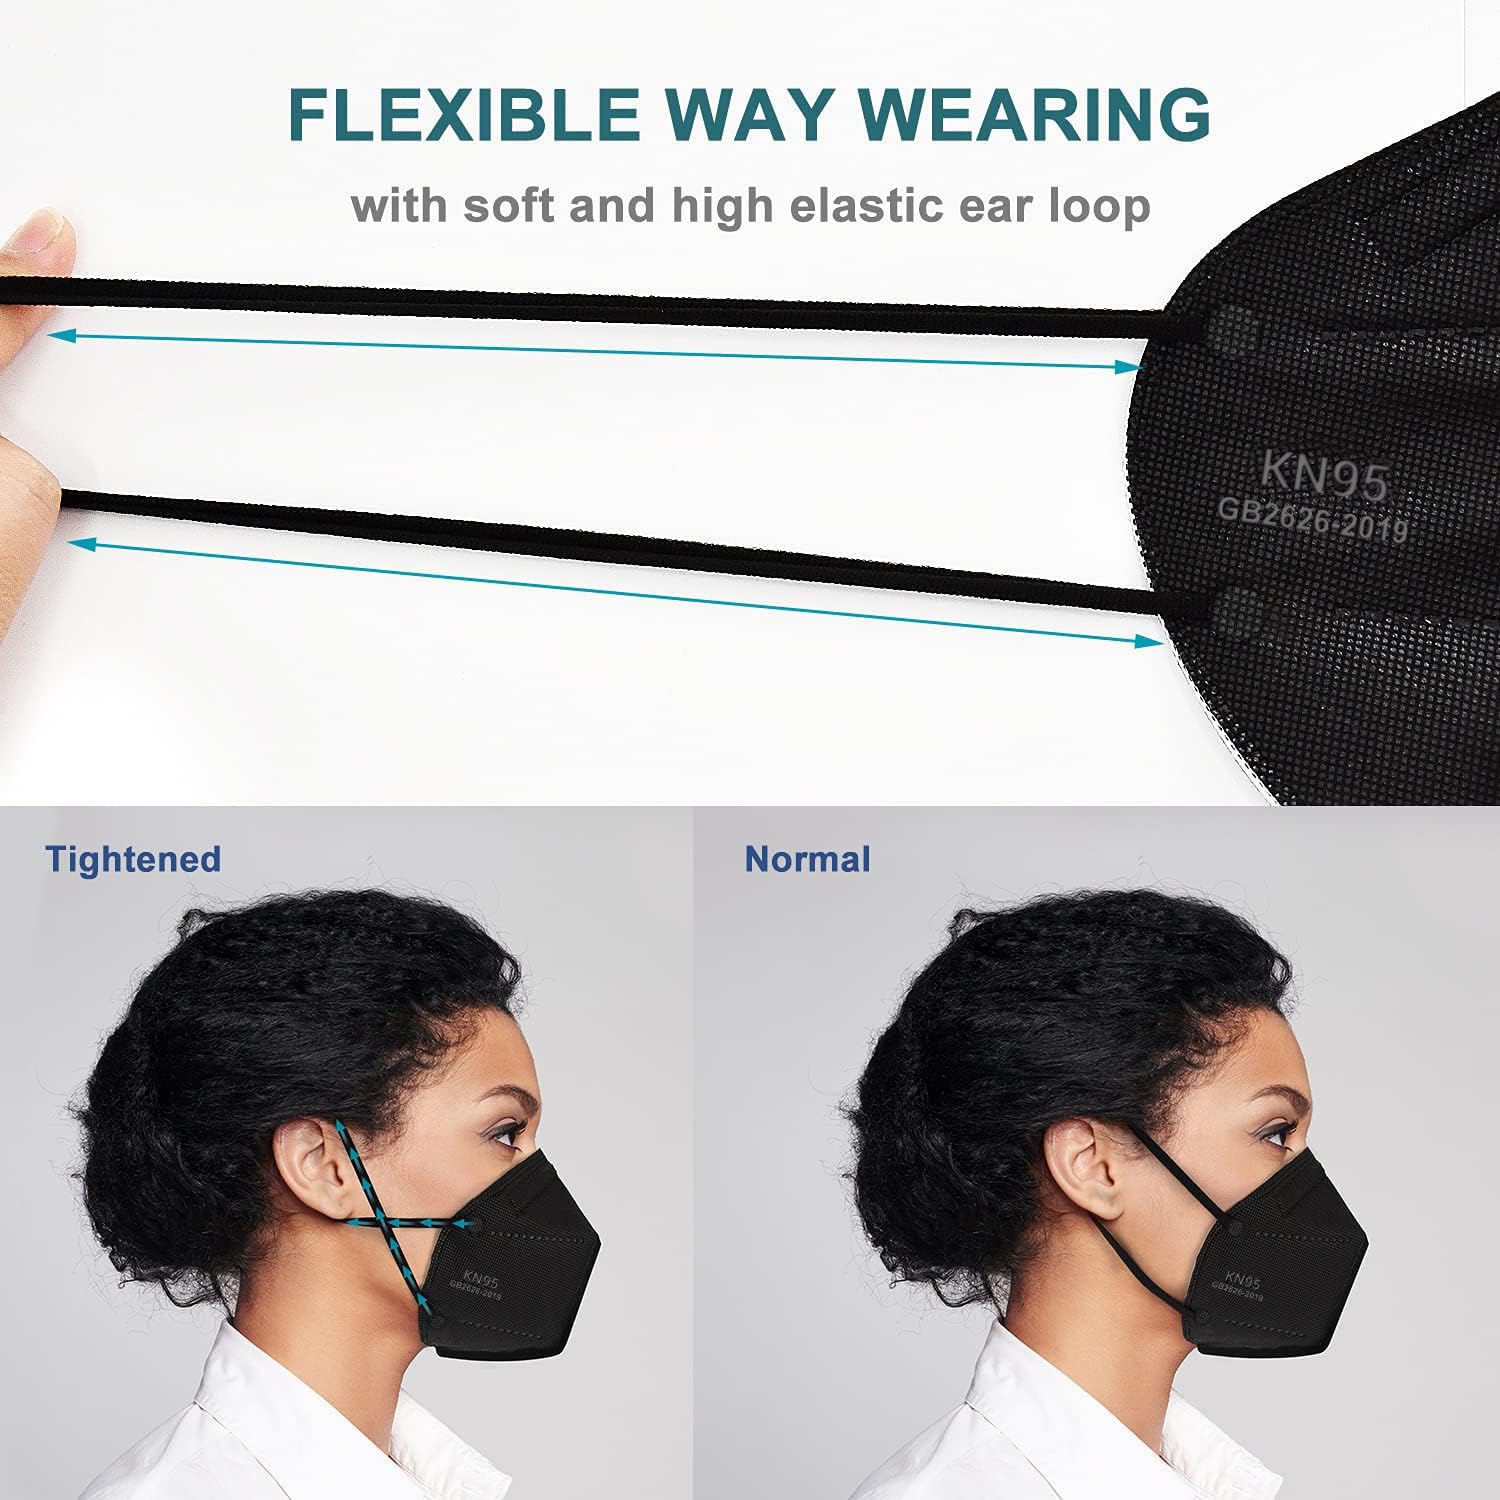 OPECTICID KN95 Face Mask, KN95 Mask 50 Pack Black, Cup Masks Breathable 5-Layer Filter Efficiency≥95% Disposable Certified KN95 Respirator Masks